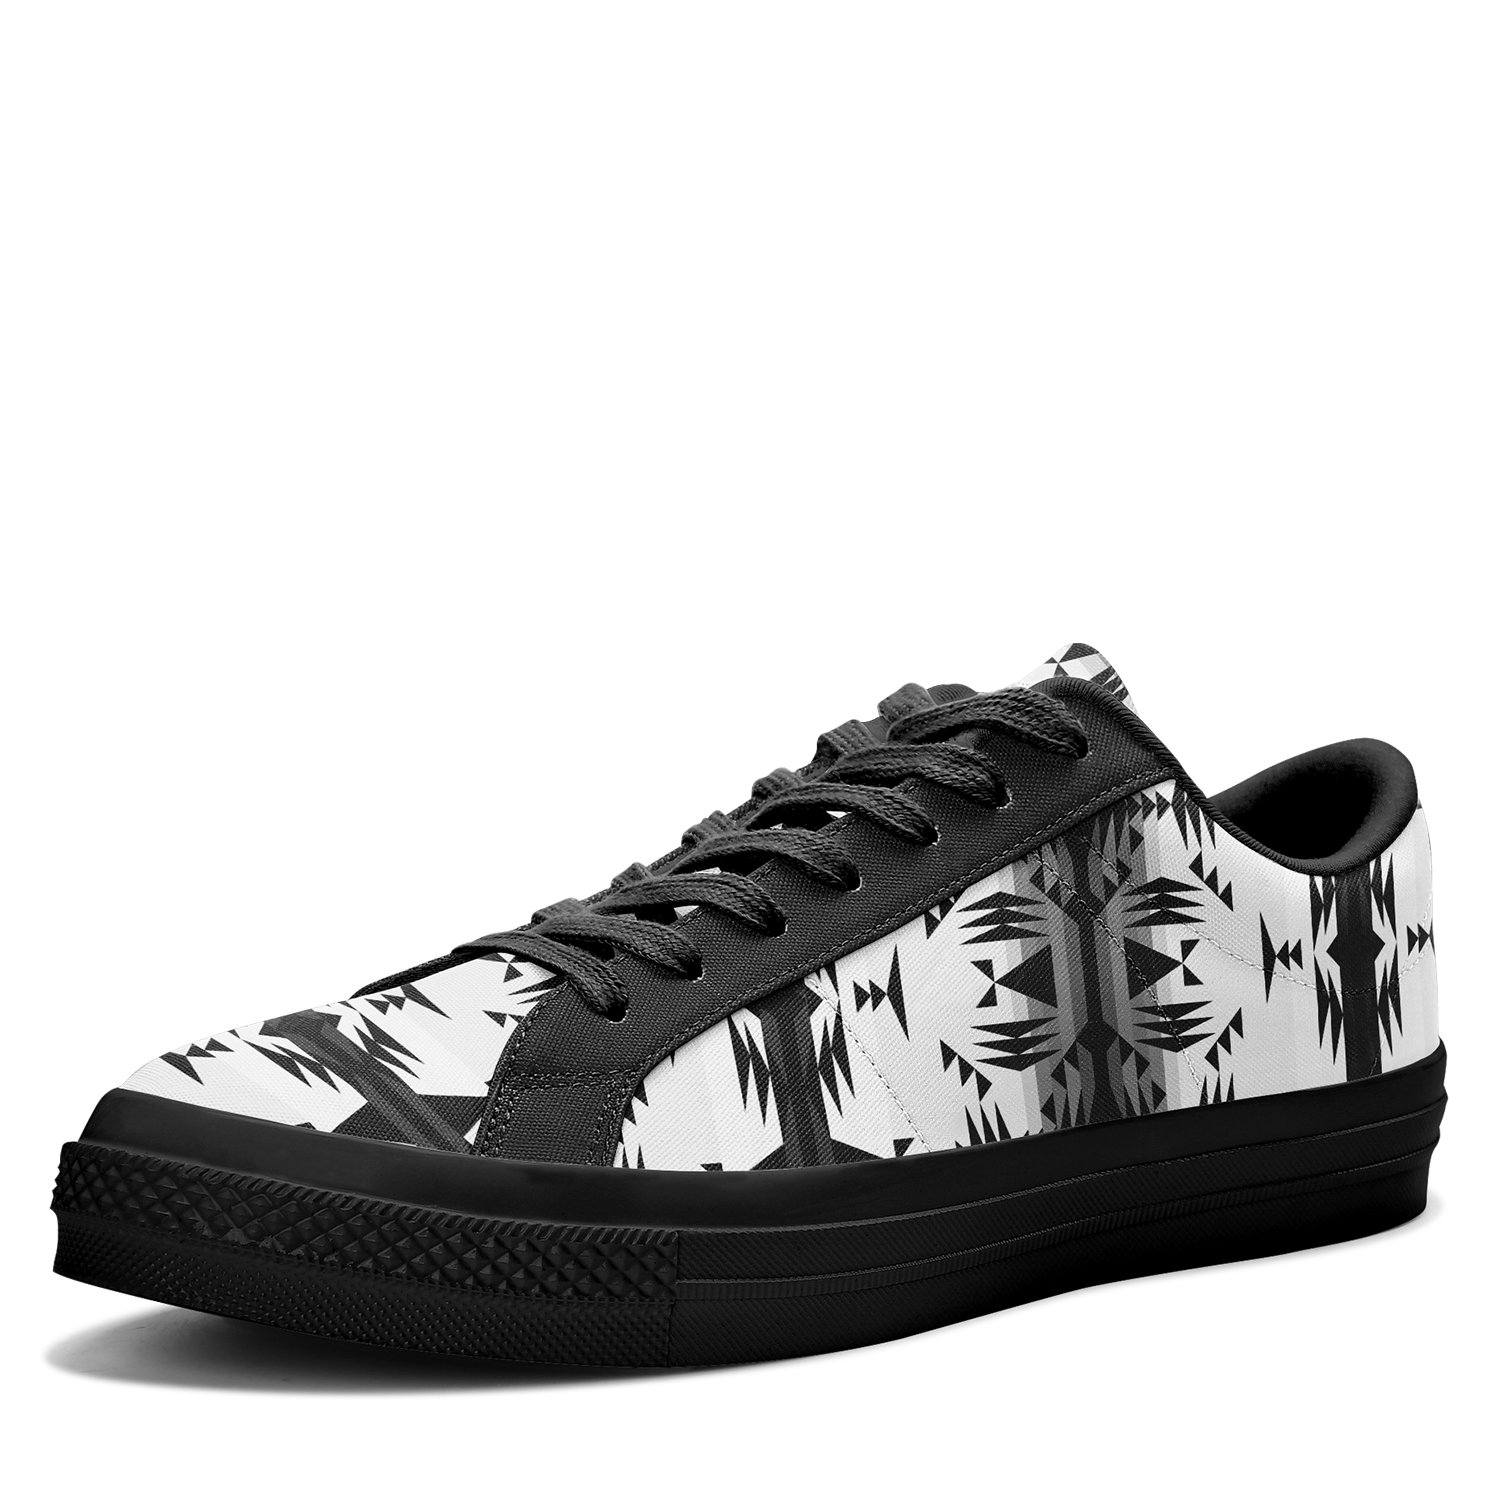 Between the Mountains White and Black Aapisi Low Top Canvas Shoes Black Sole 49 Dzine 